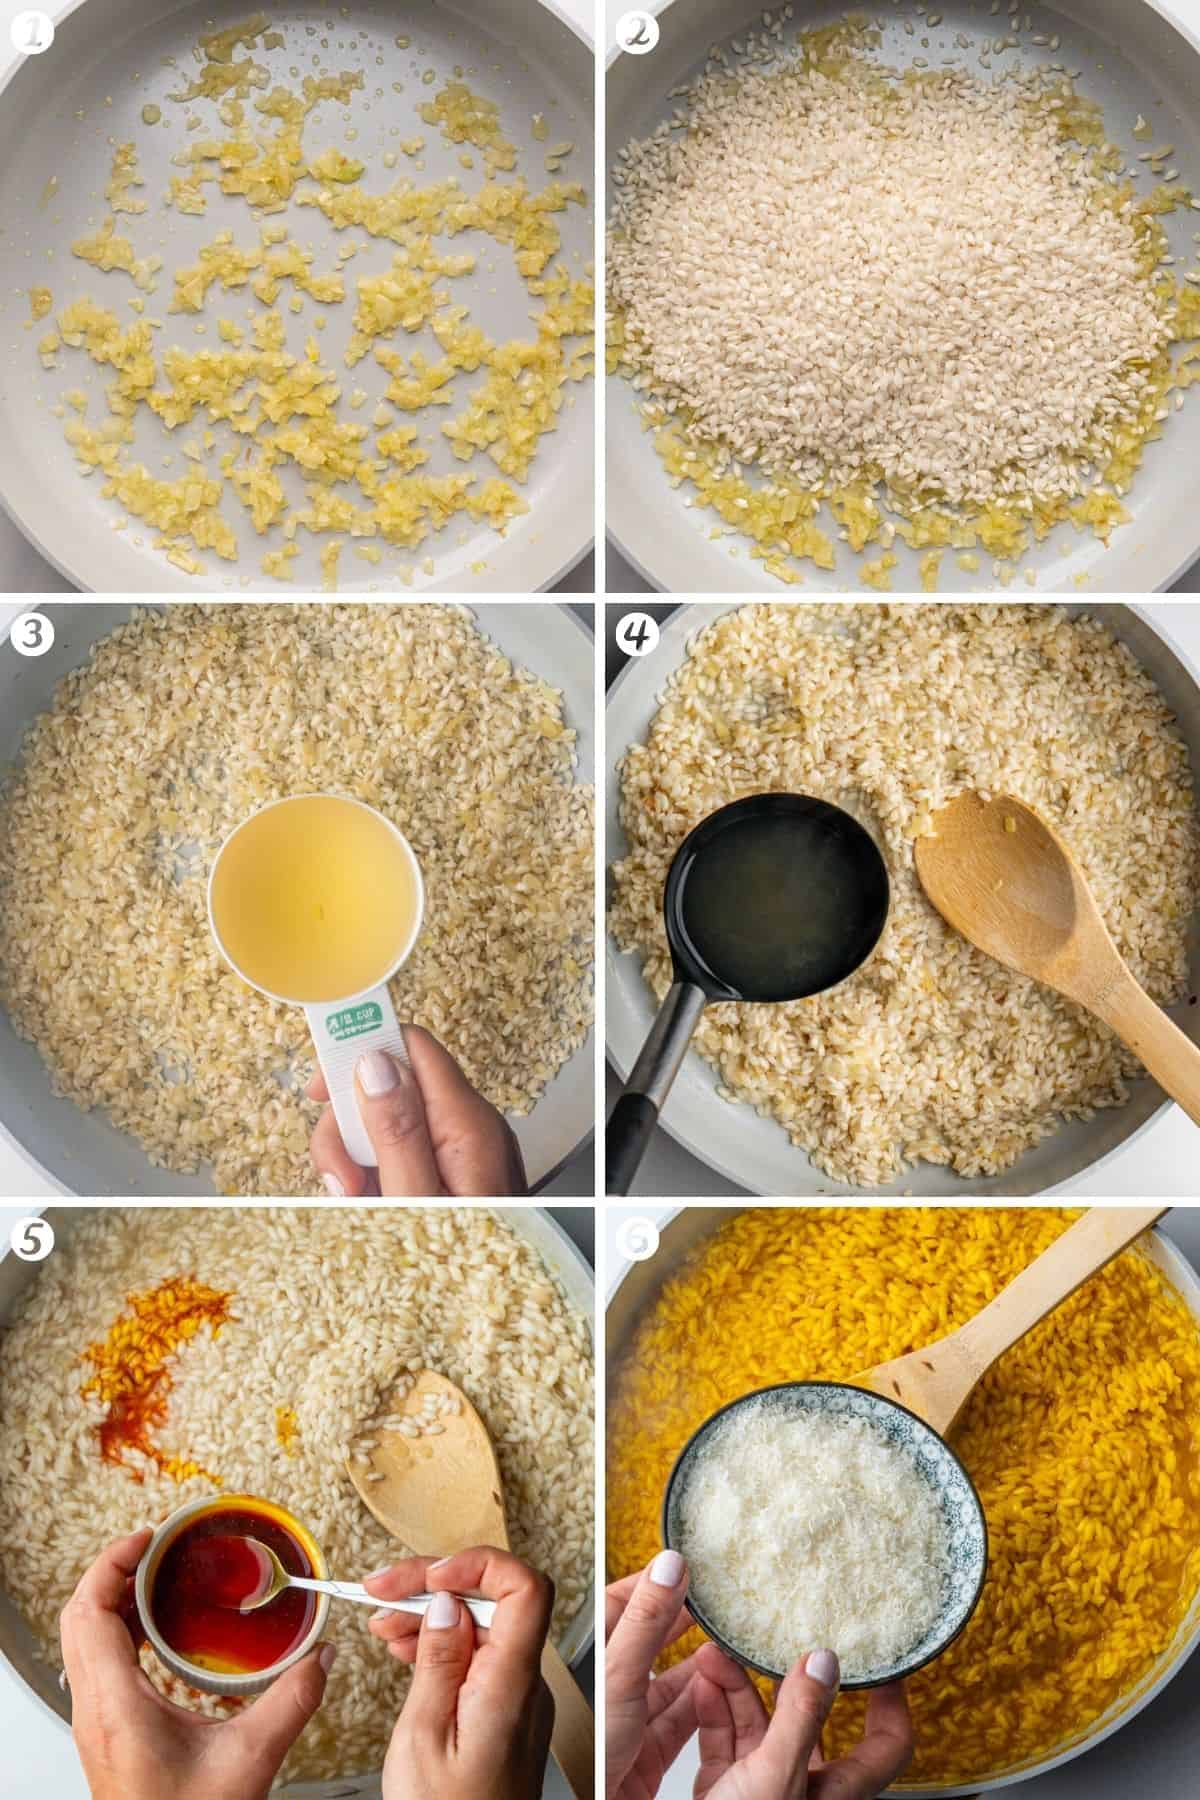 Steps on how to make saffron risotto